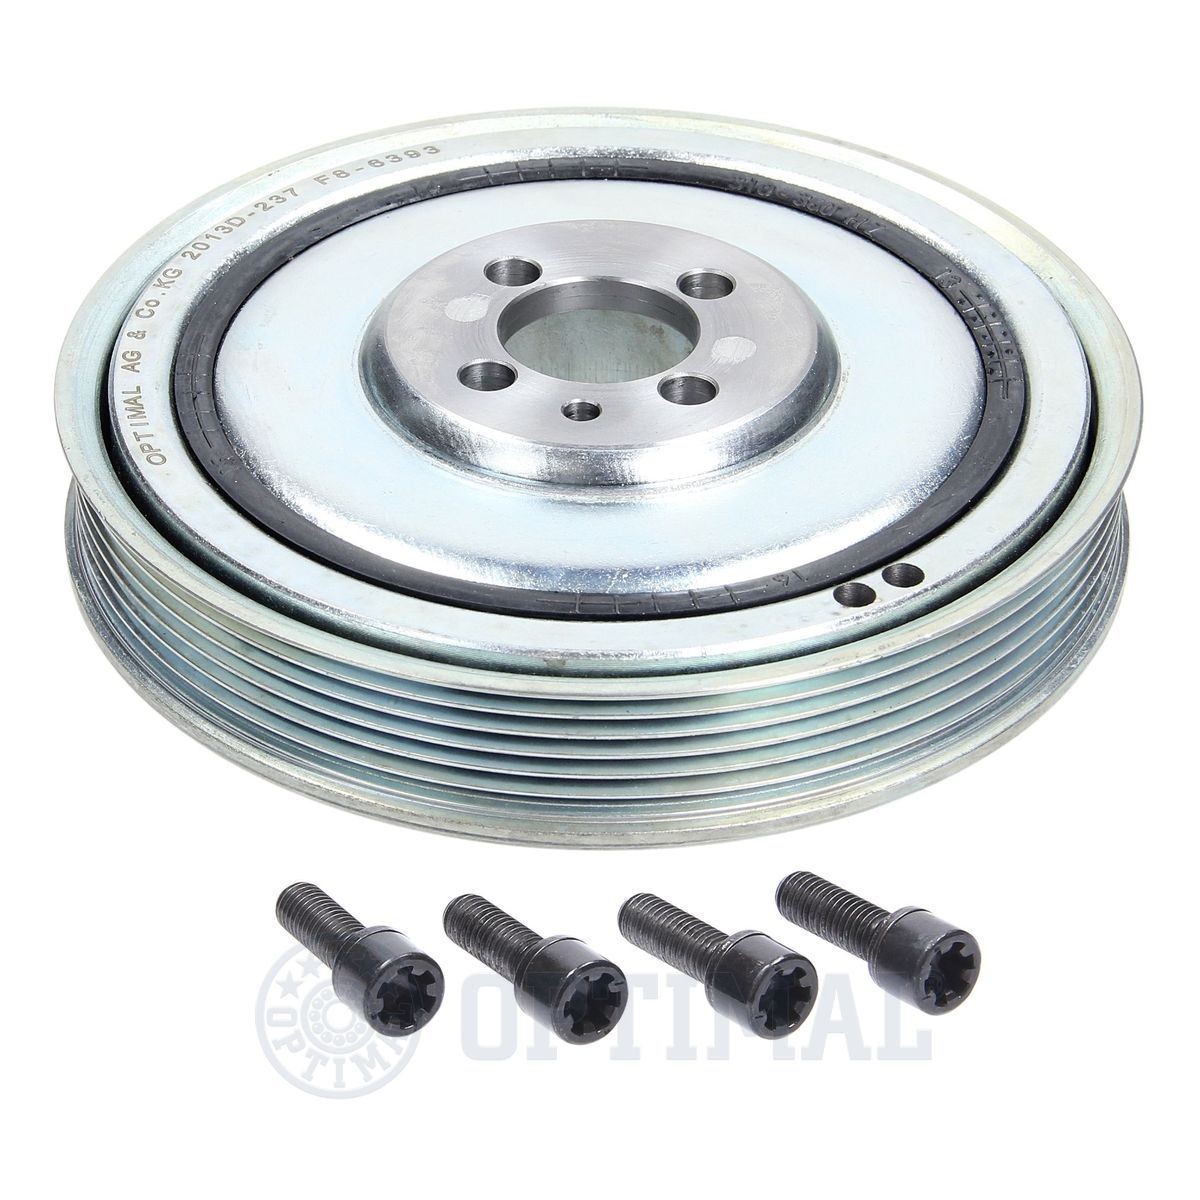 OPTIMAL F8-6393 Crankshaft pulley 6PK, Ø: 169mm, Number of ribs: 5, with bolts/screws, Decoupled